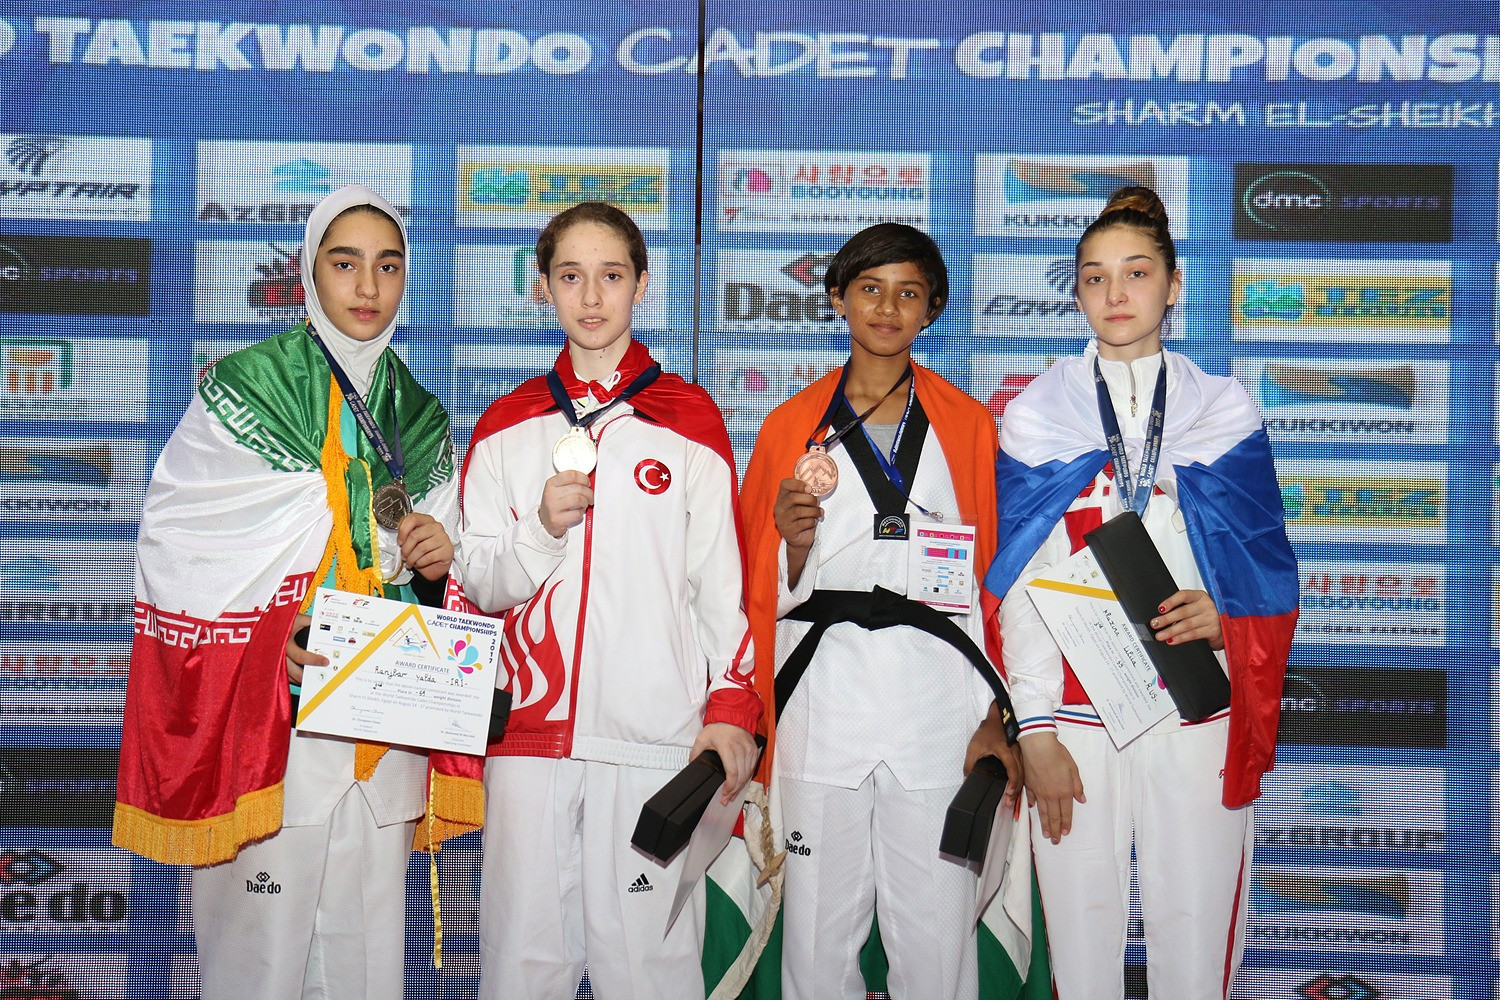 Five more gold medals were won at the youth event ©World Taekwondo